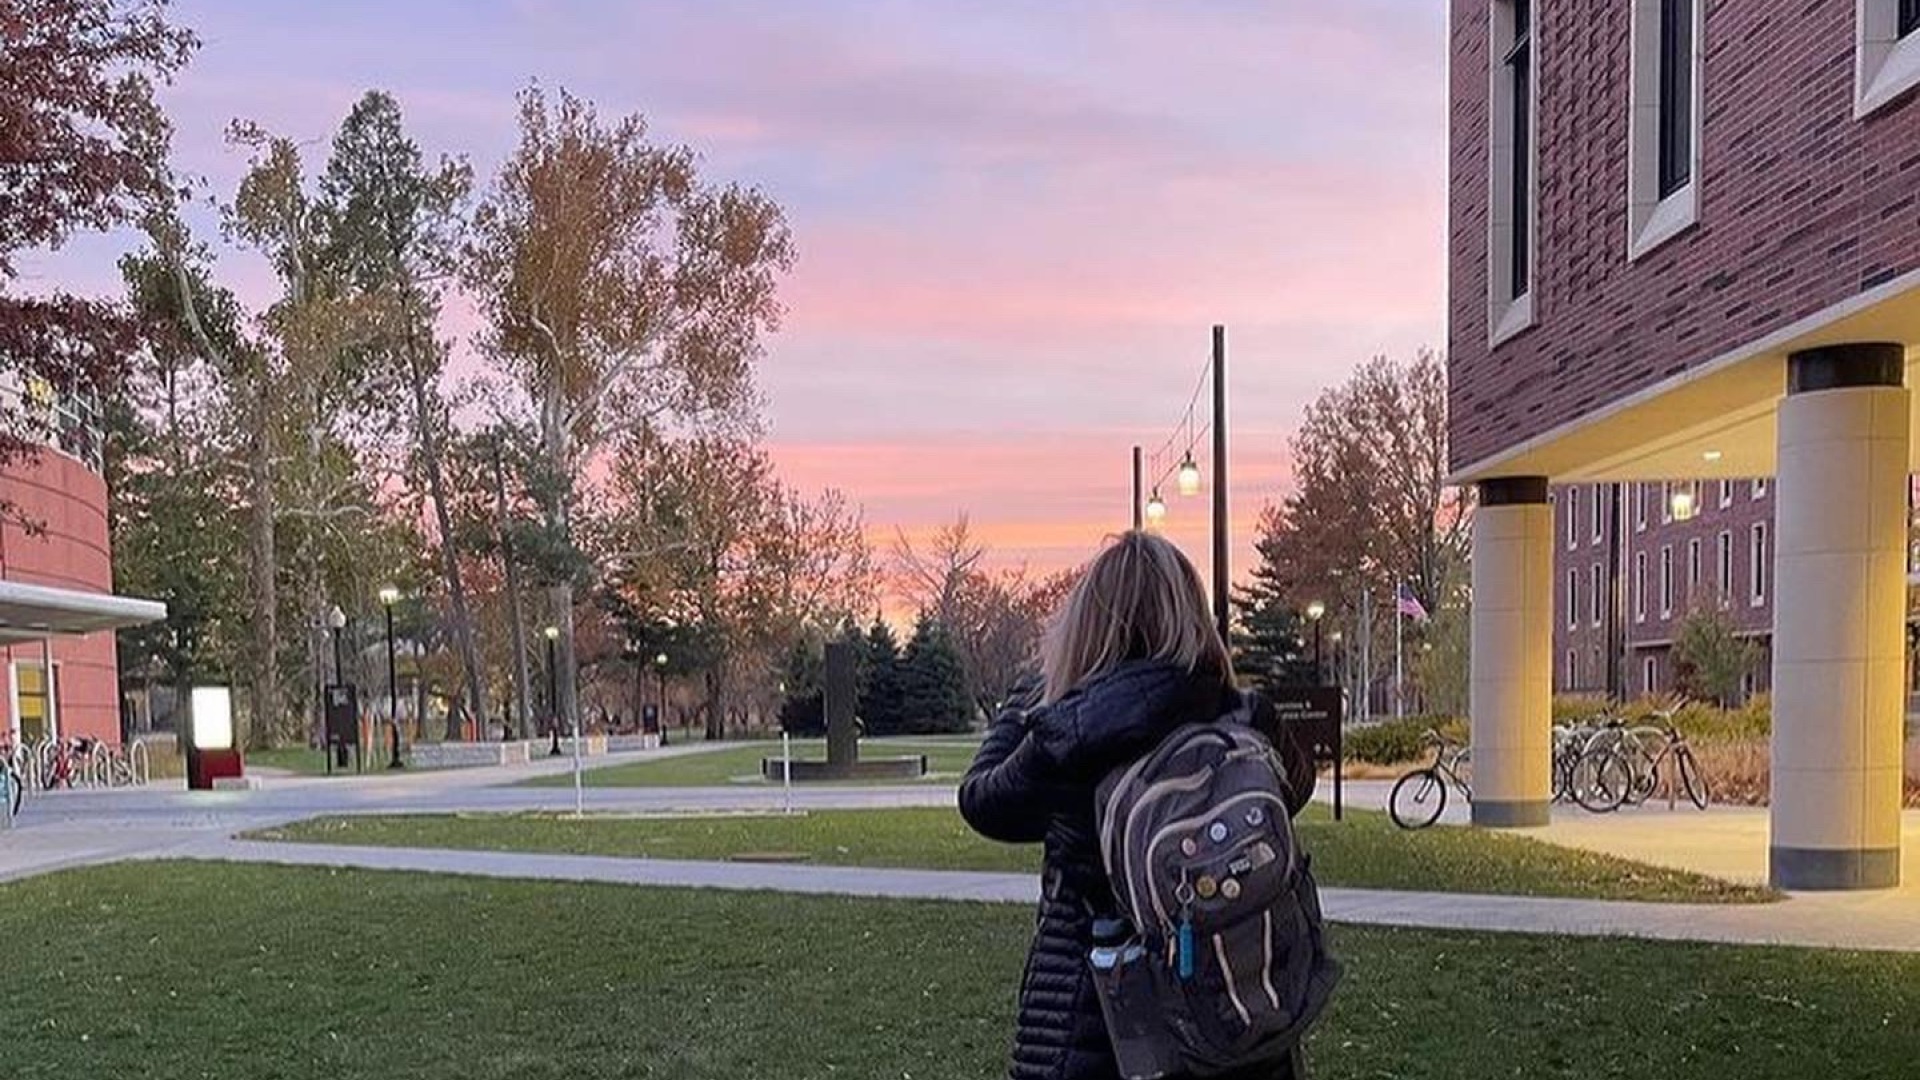 My back faces the camera as I take a picture of the beautiful sunsets in Iowa. I'm near the HSSC, which is one of the new buildings on campus